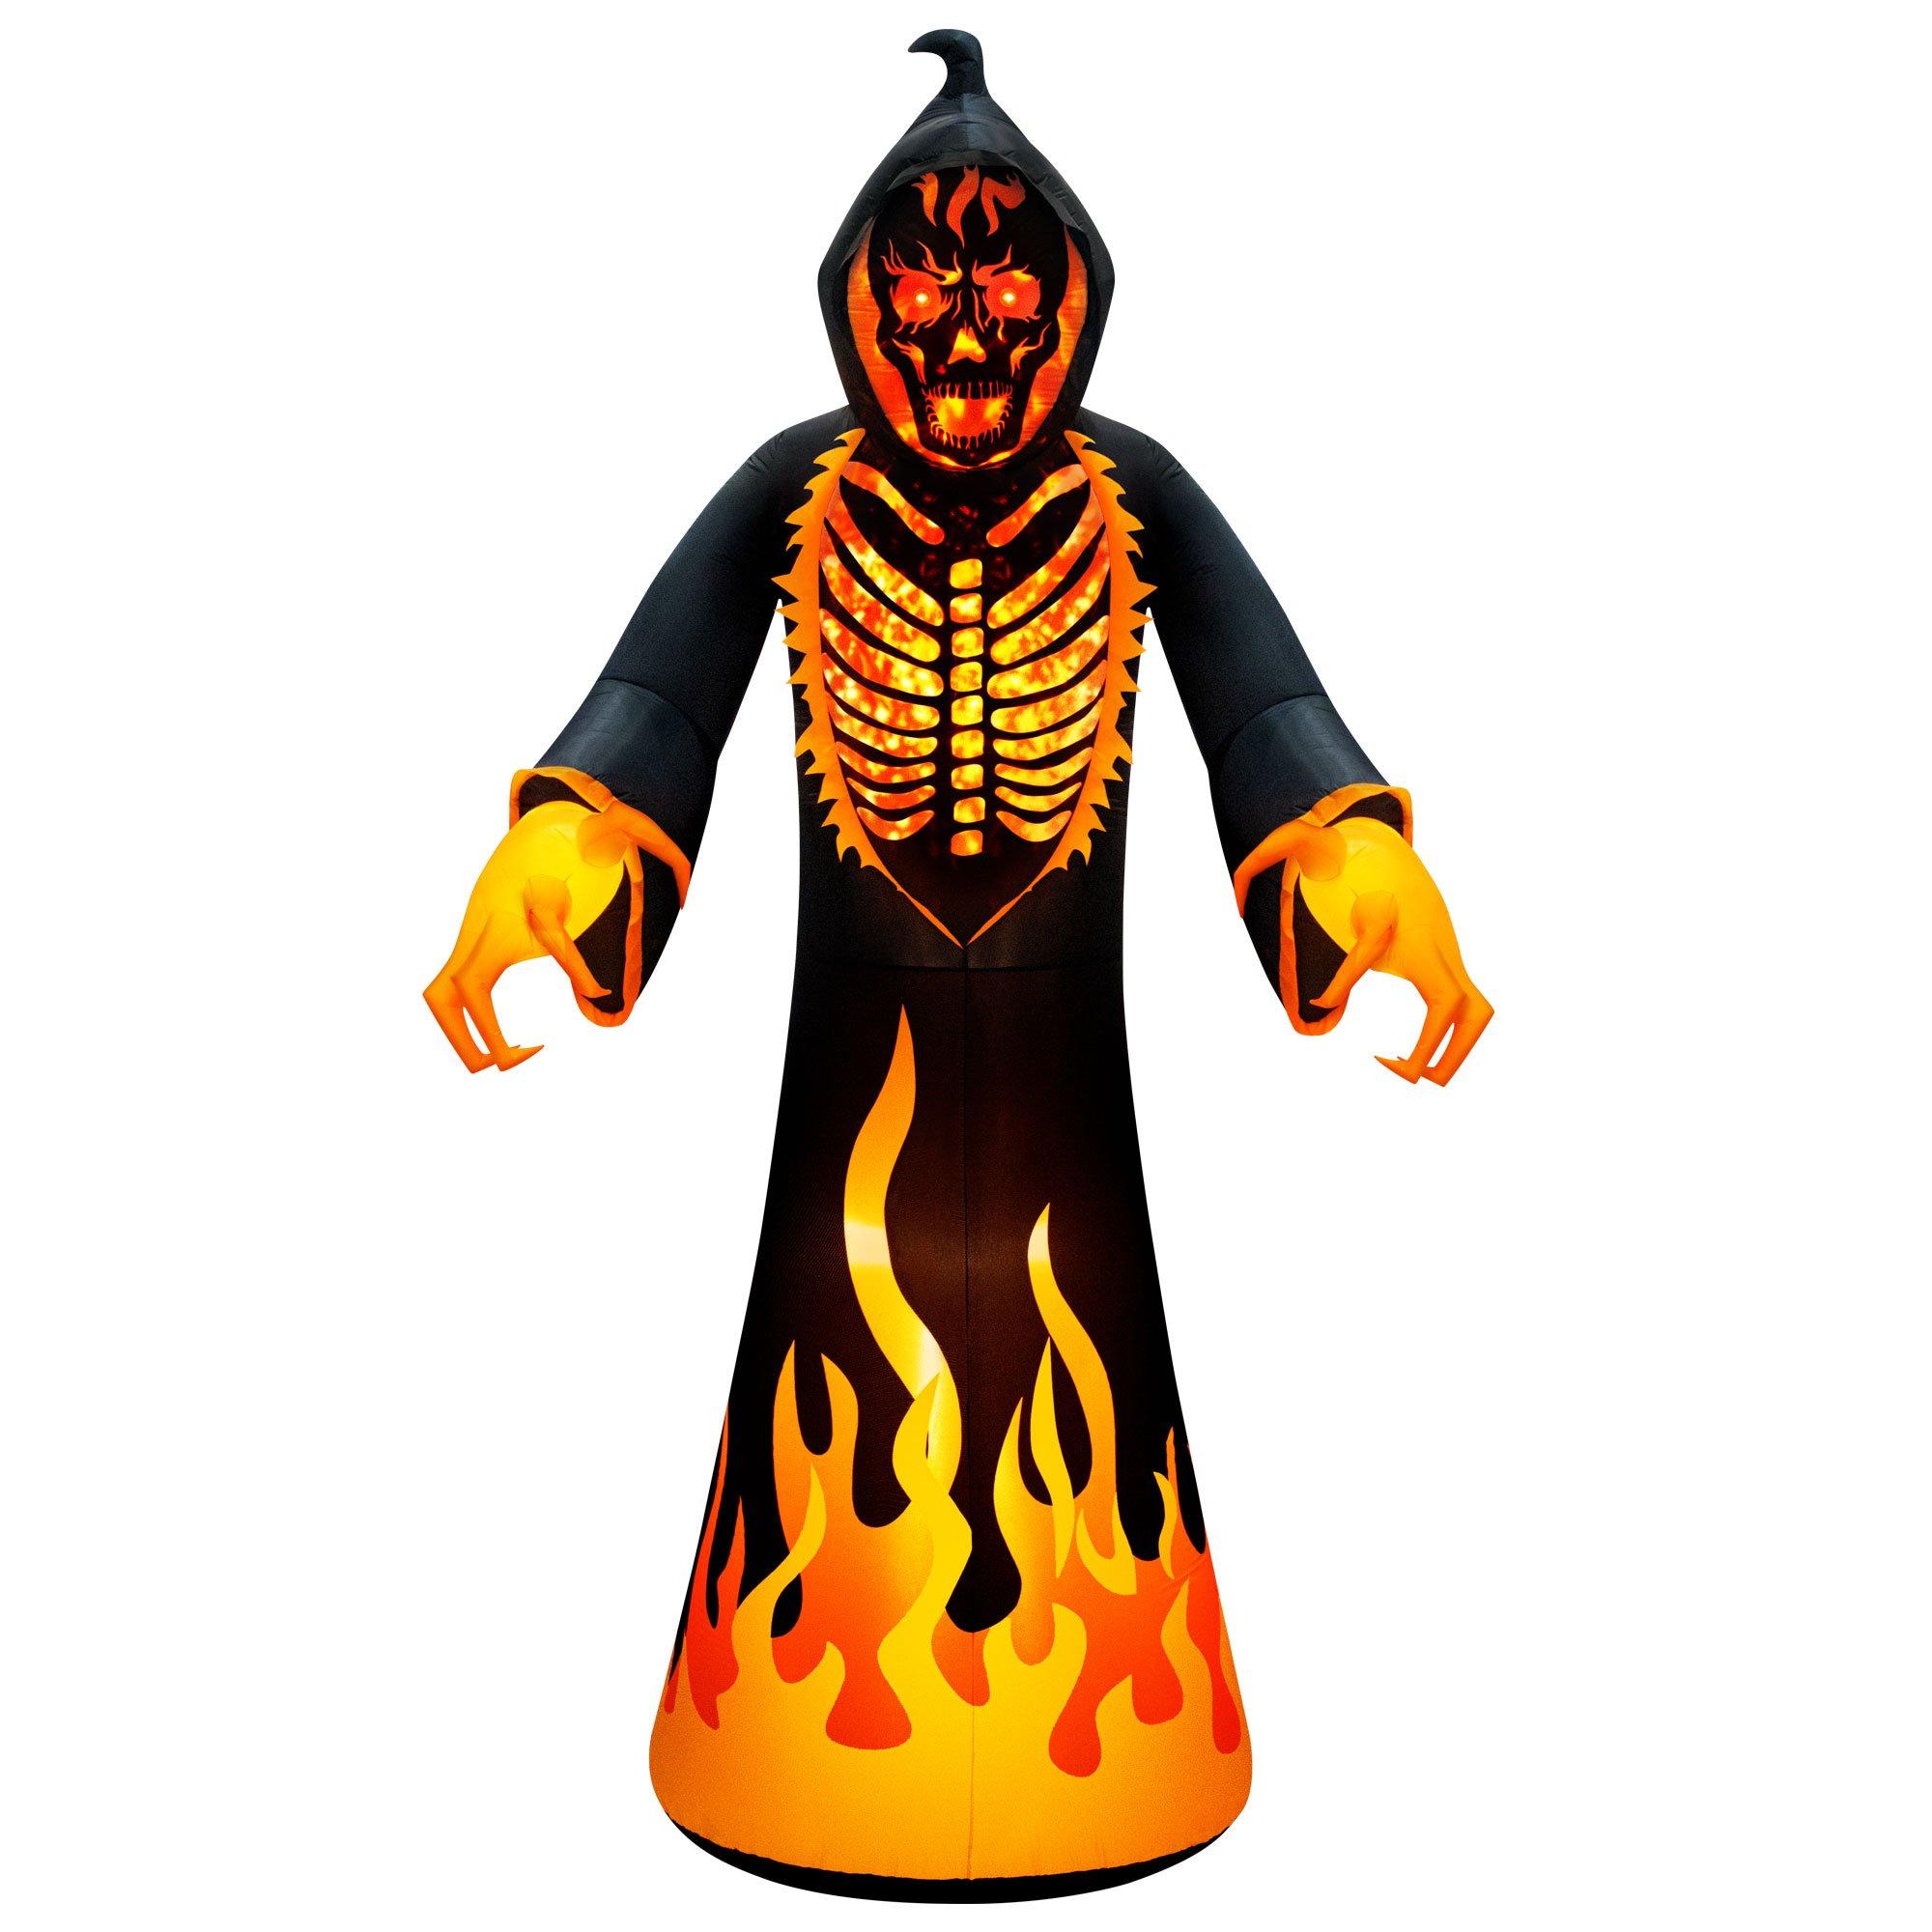 Swirling Light-Up Flaming Reaper Inflatable Yard Decoration, 7.5ft x 15ft